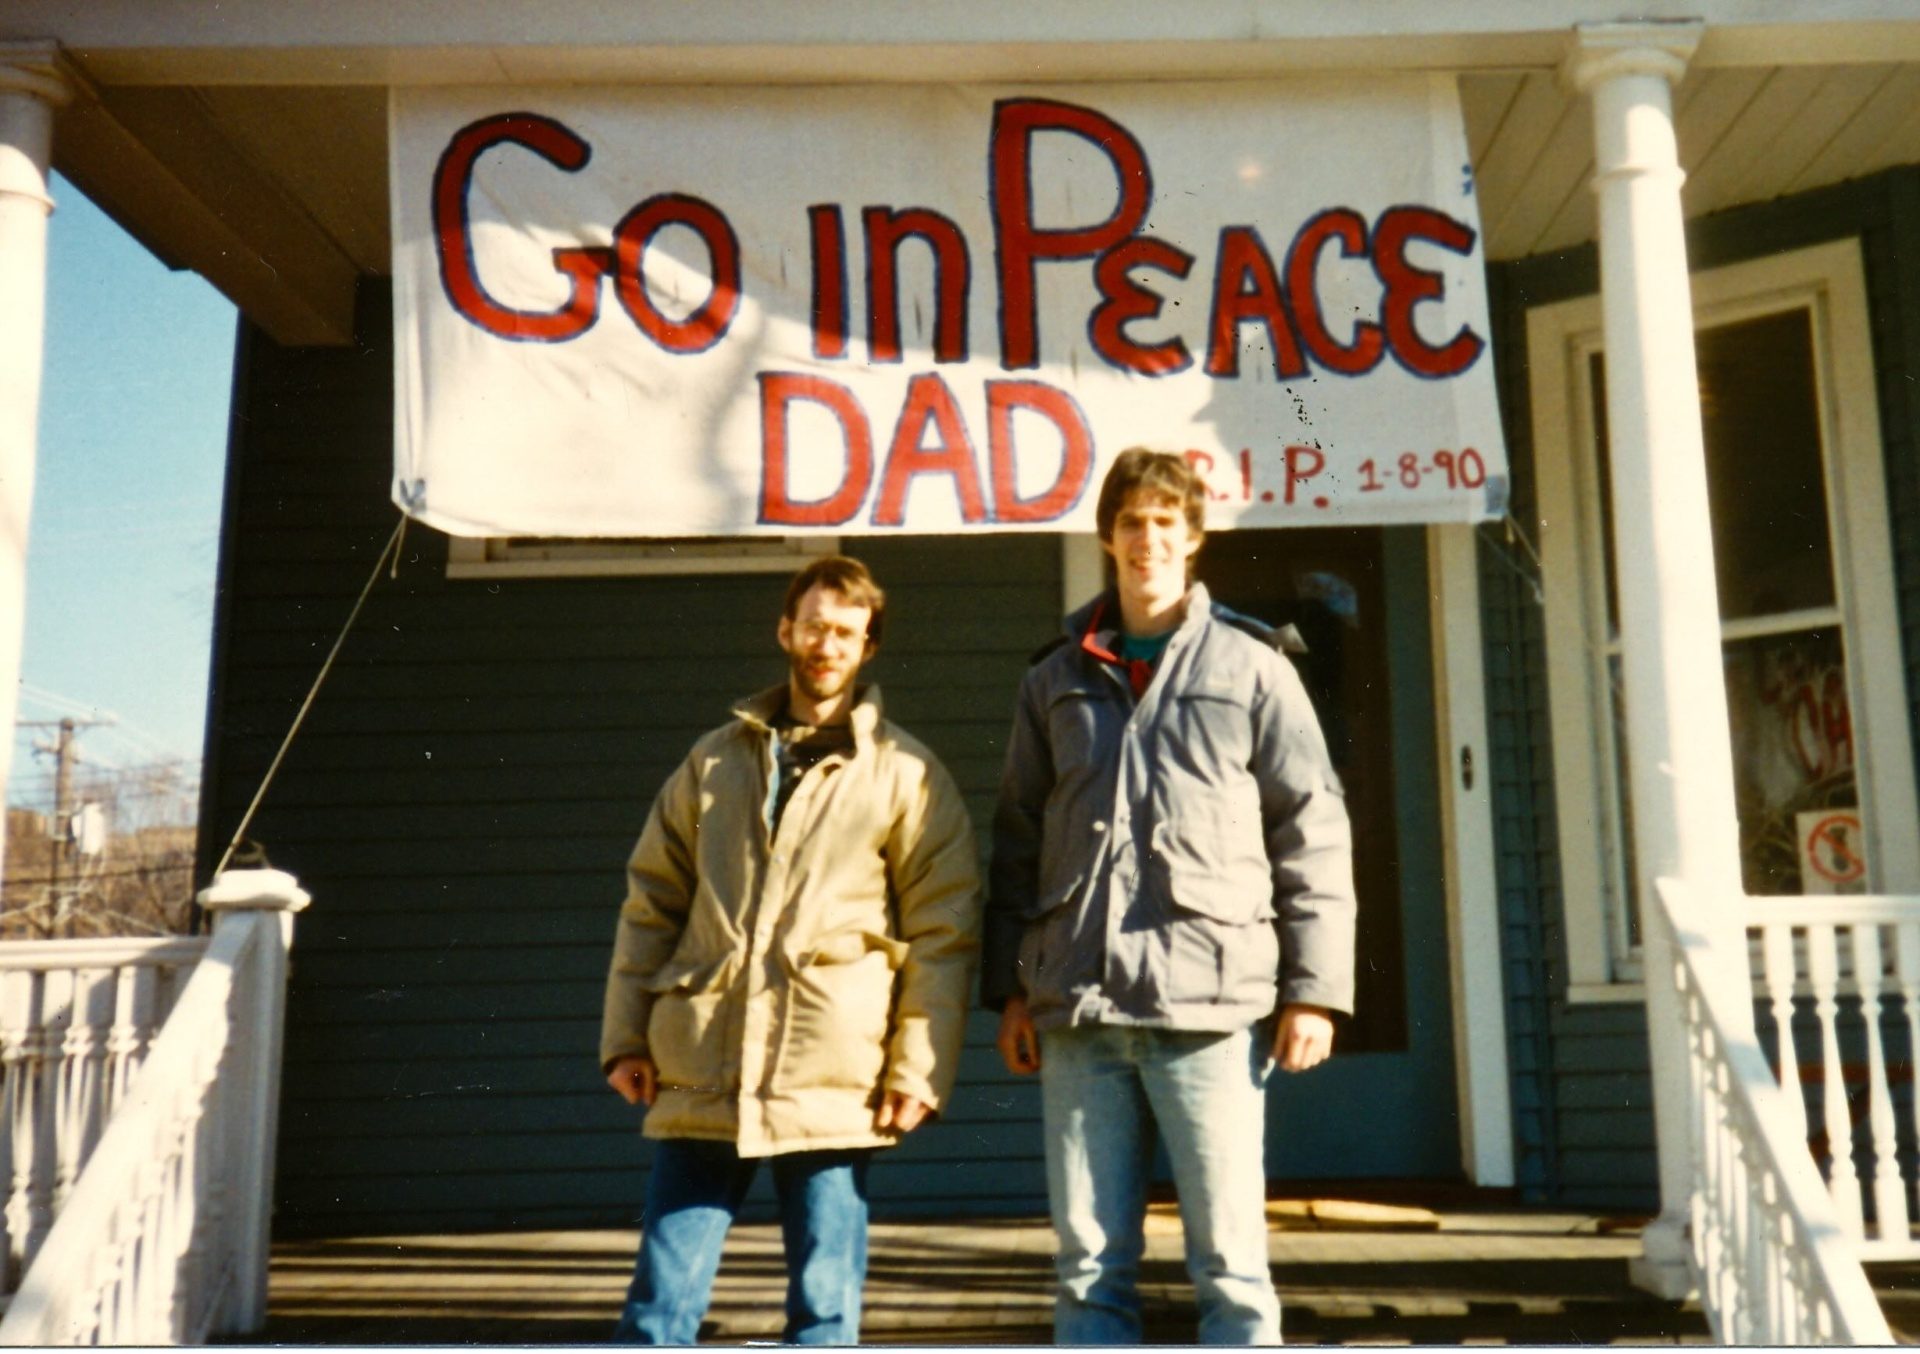 Two men wearing coats stand on a porch with white railing in front of a painted sign that reads 